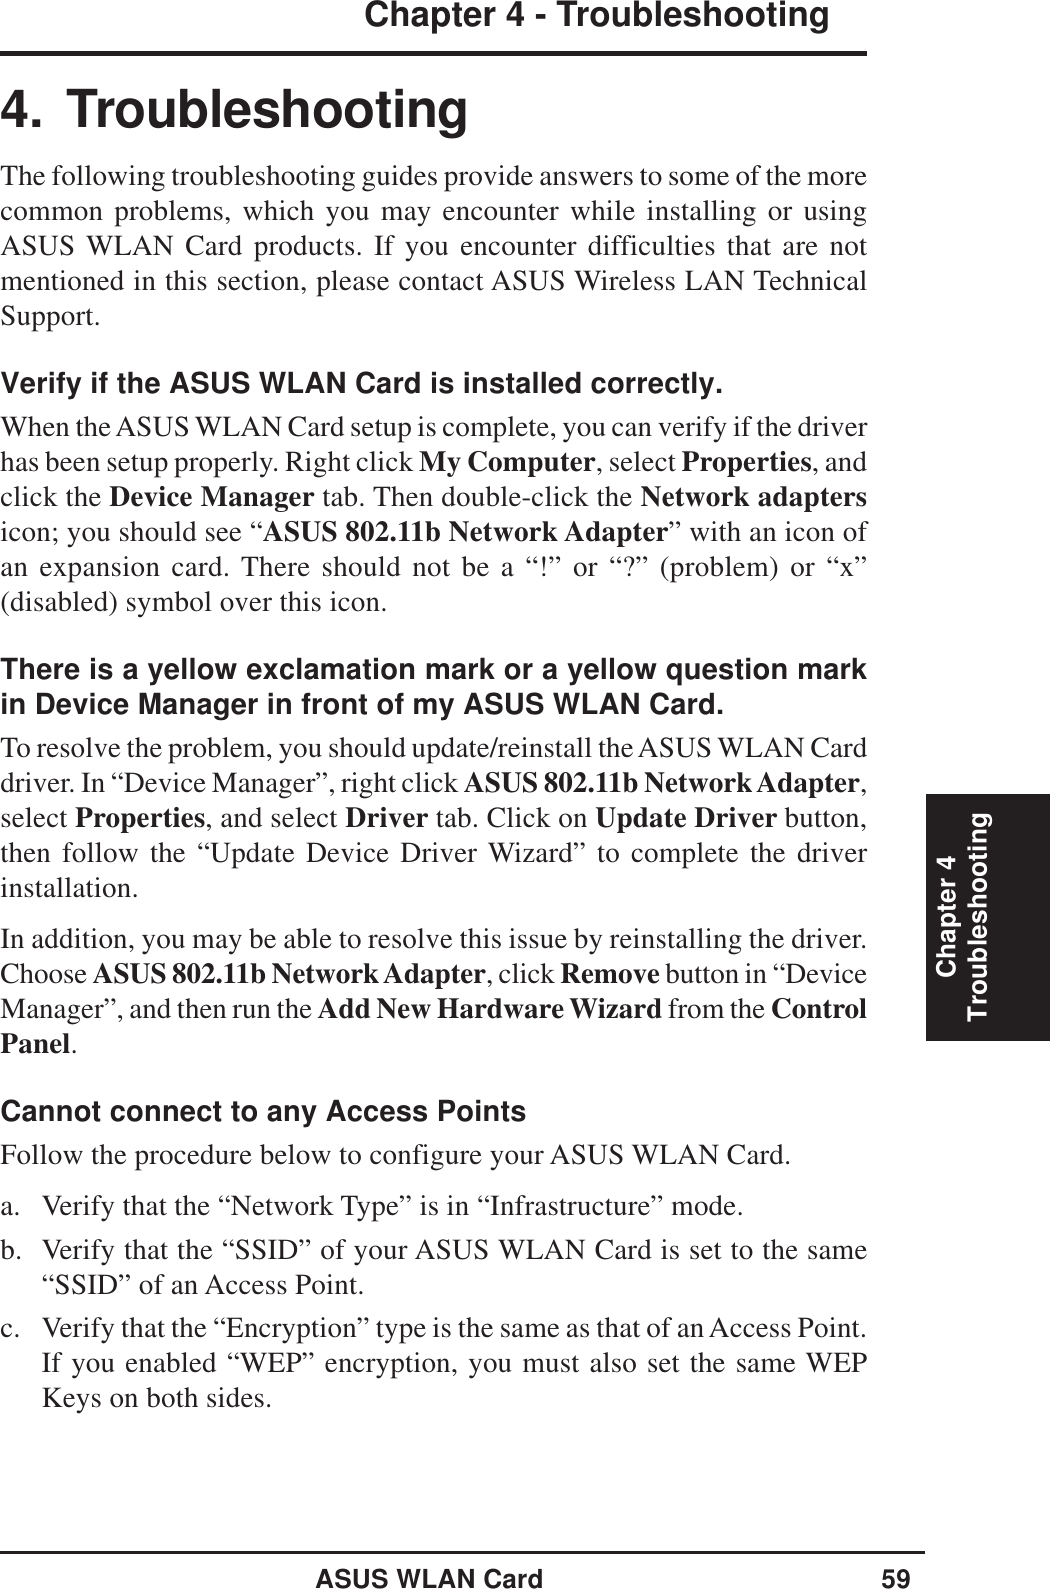 ASUS WLAN Card 59Chapter 4 - TroubleshootingChapter 4Troubleshooting4. TroubleshootingThe following troubleshooting guides provide answers to some of the morecommon problems, which you may encounter while installing or usingASUS WLAN Card products. If you encounter difficulties that are notmentioned in this section, please contact ASUS Wireless LAN TechnicalSupport.Verify if the ASUS WLAN Card is installed correctly.When the ASUS WLAN Card setup is complete, you can verify if the driverhas been setup properly. Right click My Computer, select Properties, andclick the Device Manager tab. Then double-click the Network adaptersicon; you should see “ASUS 802.11b Network Adapter” with an icon ofan expansion card. There should not be a “!” or “?” (problem) or “x”(disabled) symbol over this icon.There is a yellow exclamation mark or a yellow question markin Device Manager in front of my ASUS WLAN Card.To resolve the problem, you should update/reinstall the ASUS WLAN Carddriver. In “Device Manager”, right click ASUS 802.11b Network Adapter,select Properties, and select Driver tab. Click on Update Driver button,then follow the “Update Device Driver Wizard” to complete the driverinstallation.In addition, you may be able to resolve this issue by reinstalling the driver.Choose ASUS 802.11b Network Adapter, click Remove button in “DeviceManager”, and then run the Add New Hardware Wizard from the ControlPanel.Cannot connect to any Access PointsFollow the procedure below to configure your ASUS WLAN Card.a. Verify that the “Network Type” is in “Infrastructure” mode.b. Verify that the “SSID” of your ASUS WLAN Card is set to the same“SSID” of an Access Point.c. Verify that the “Encryption” type is the same as that of an Access Point.If you enabled “WEP” encryption, you must also set the same WEPKeys on both sides.